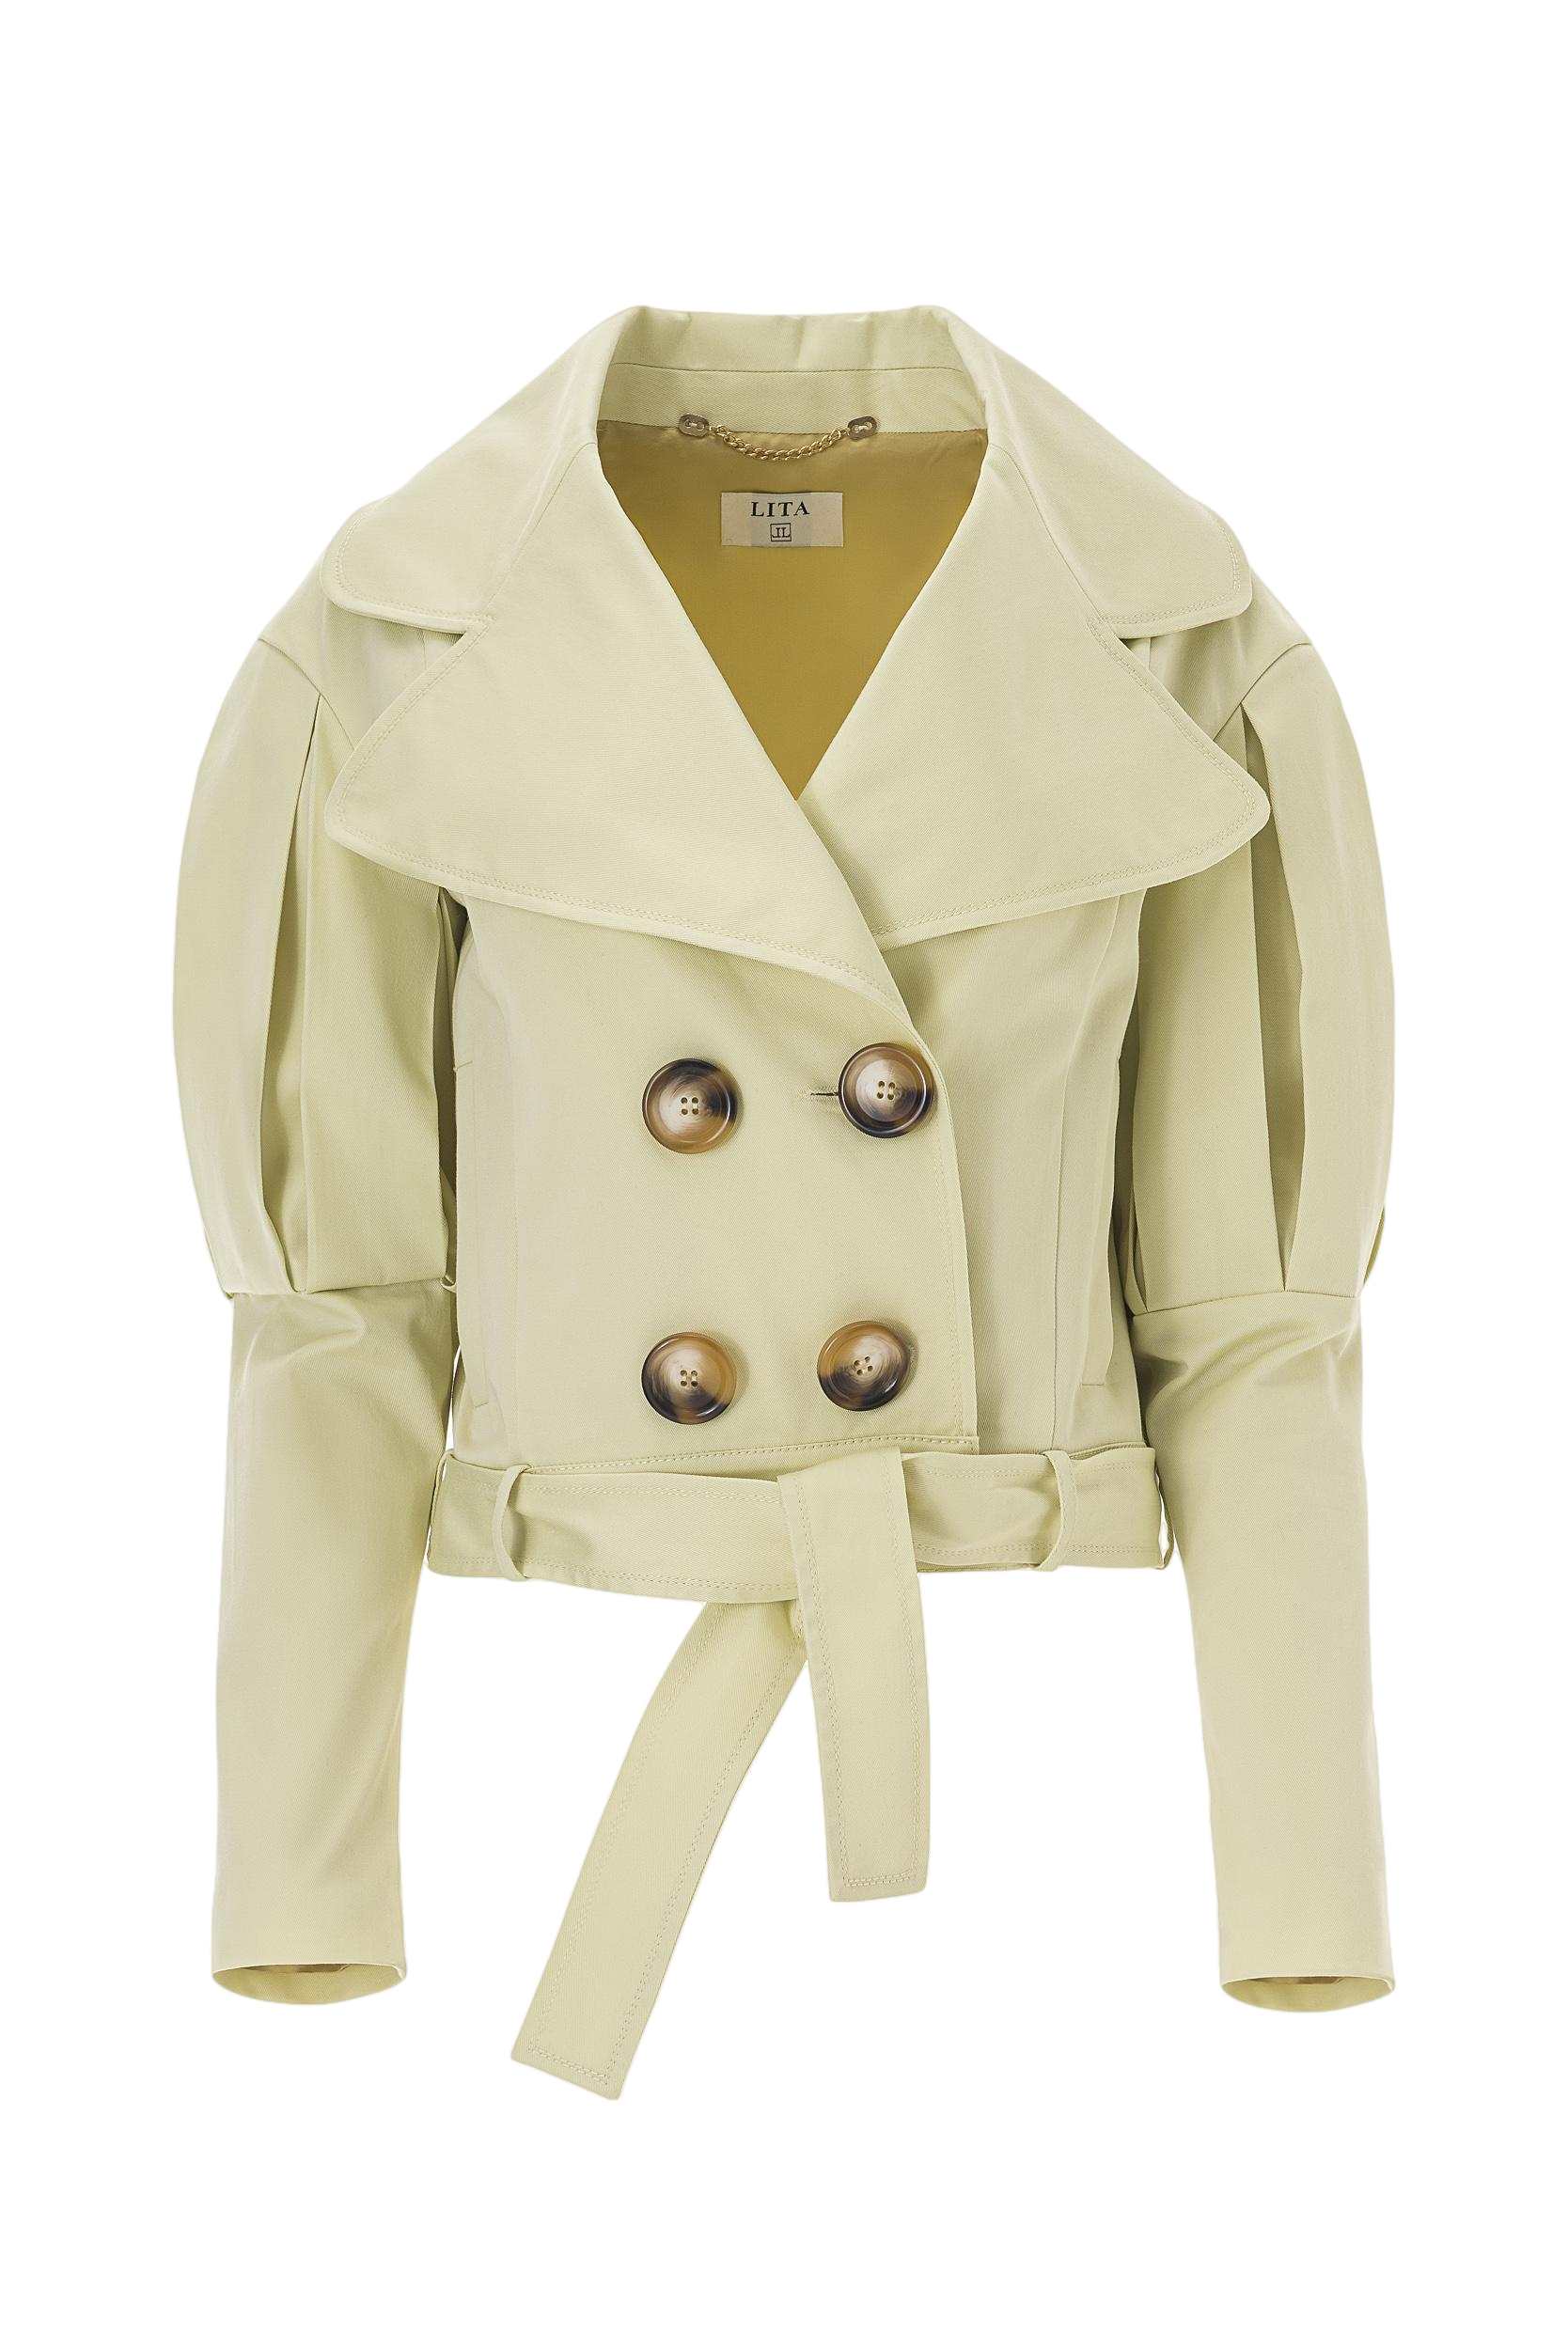 Statement jacket with oversized lapels in yellow von Lita Couture